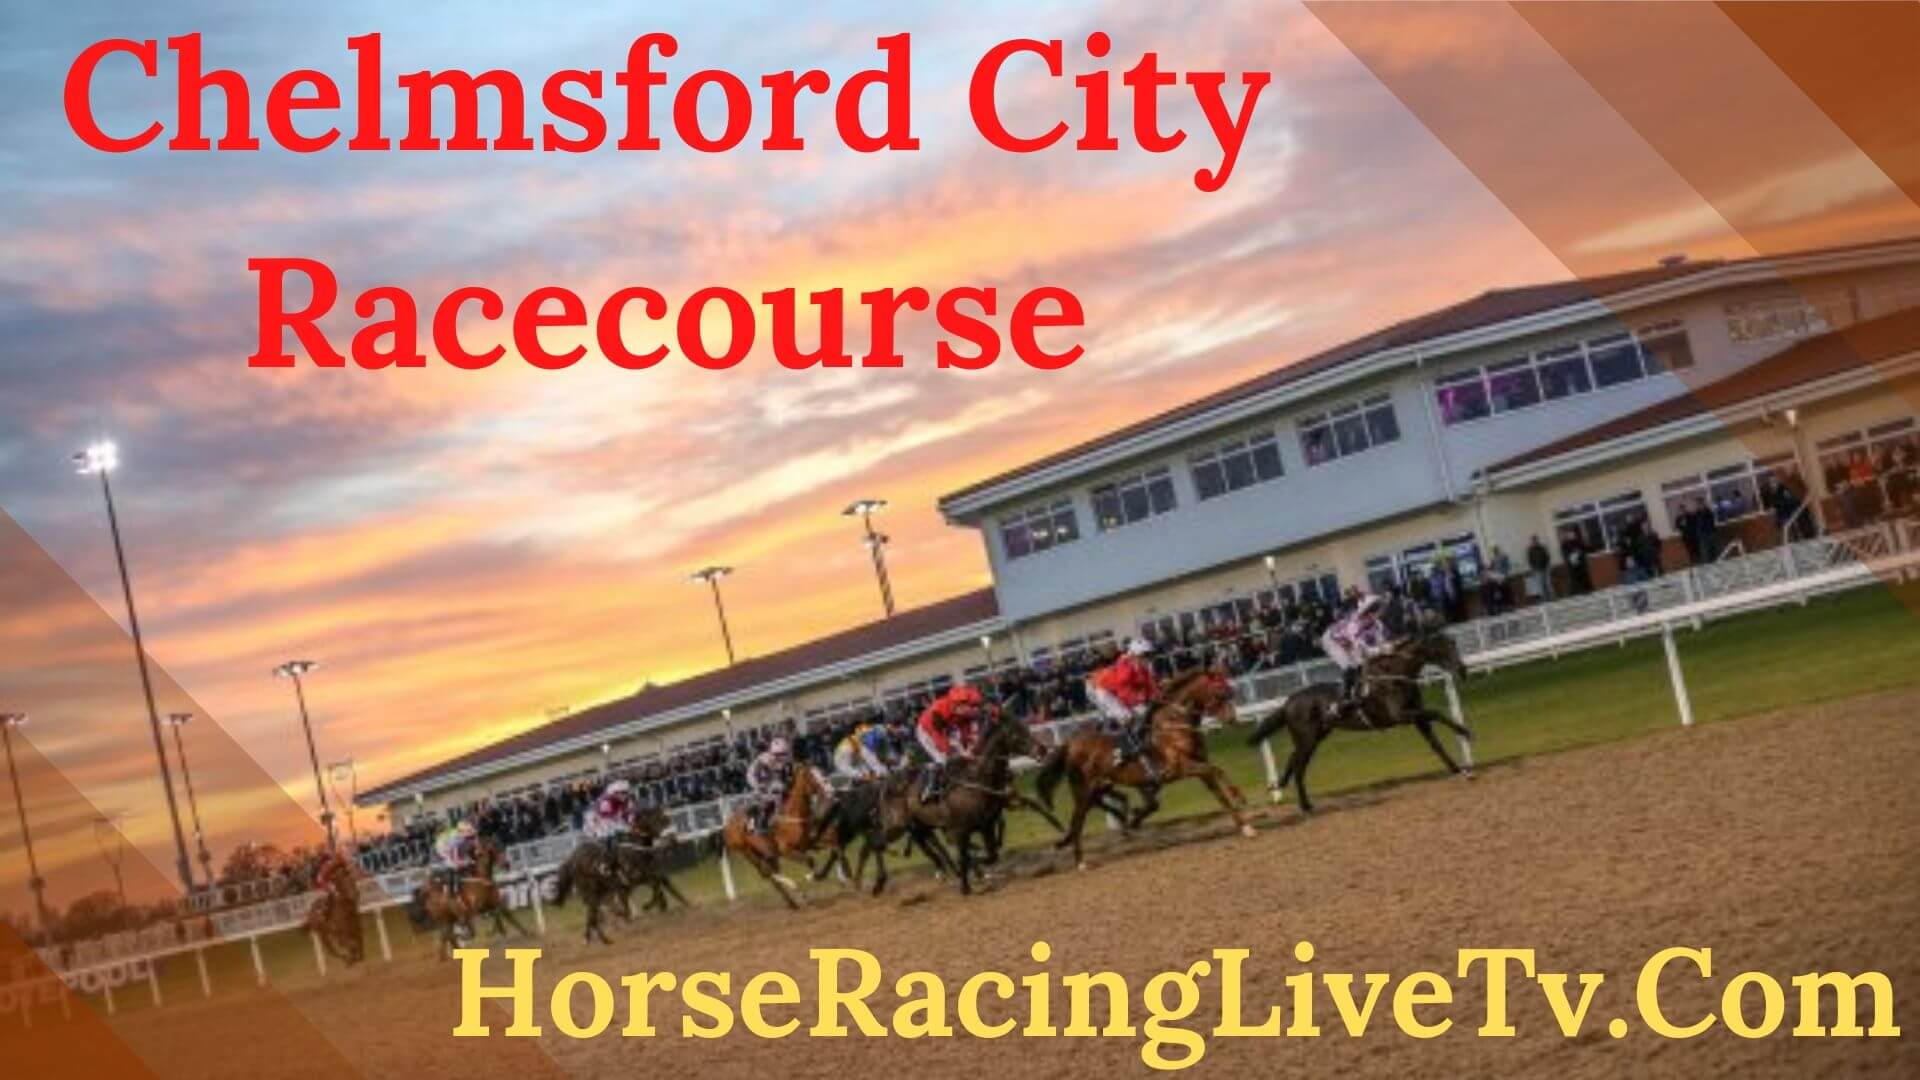 Chelmsford City Tote Placepot Your First Bet Today Handicap 5 20200617